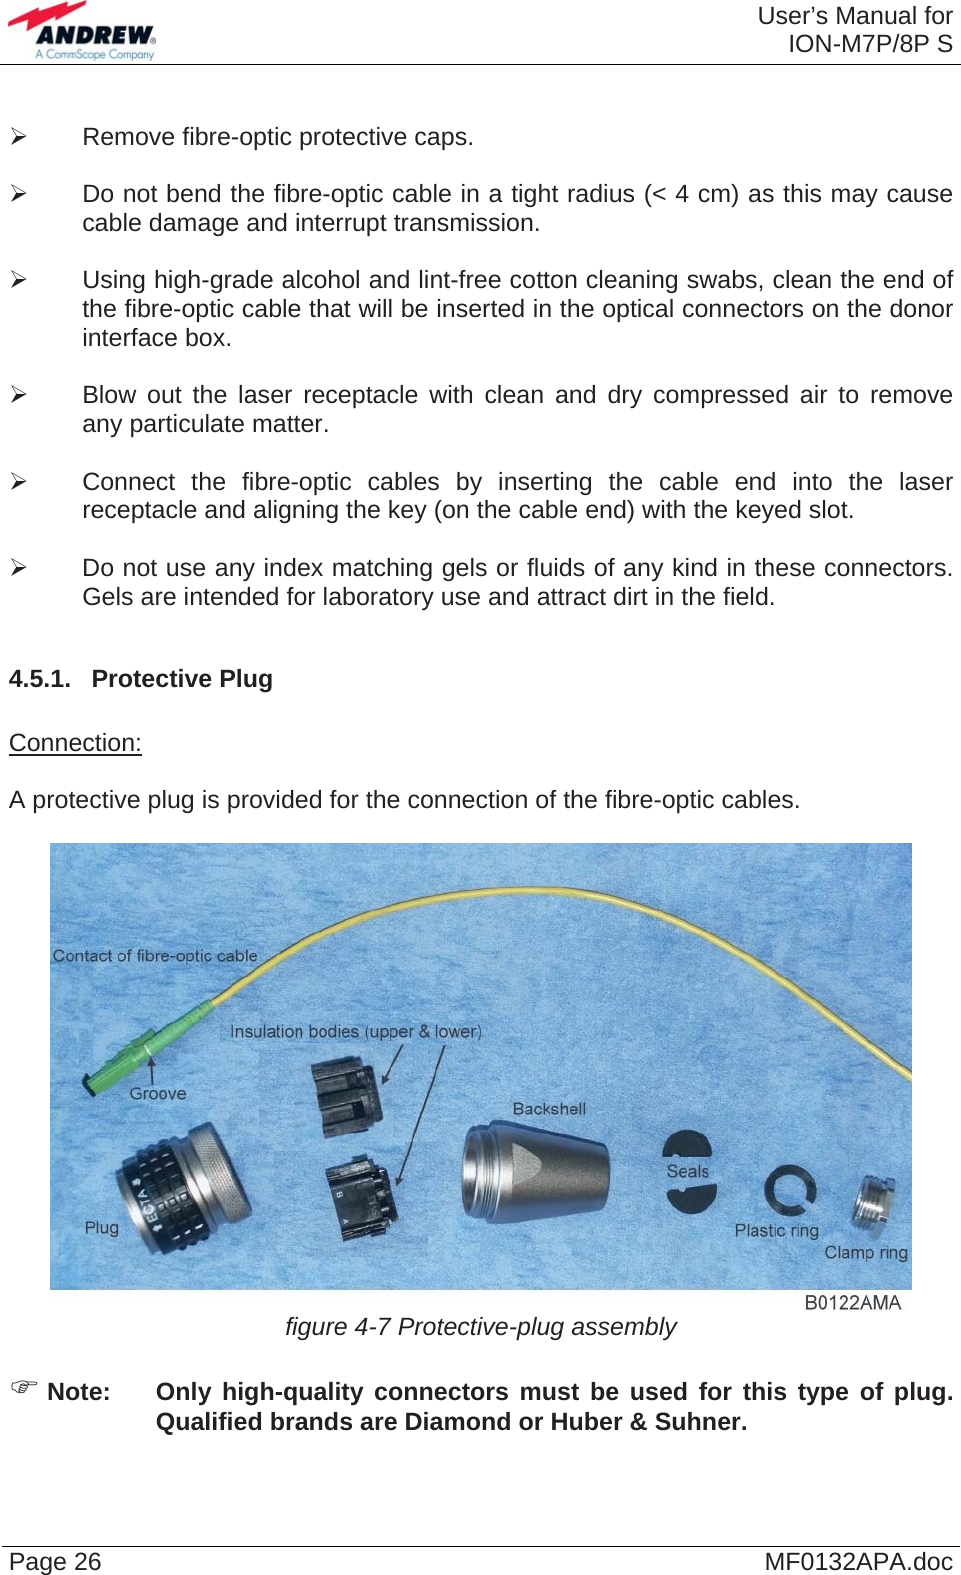  User’s Manual forION-M7P/8P S Page 26  MF0132APA.doc ¾  Remove fibre-optic protective caps.  ¾  Do not bend the fibre-optic cable in a tight radius (&lt; 4 cm) as this may cause cable damage and interrupt transmission.  ¾  Using high-grade alcohol and lint-free cotton cleaning swabs, clean the end of the fibre-optic cable that will be inserted in the optical connectors on the donor interface box.  ¾  Blow out the laser receptacle with clean and dry compressed air to remove any particulate matter.  ¾  Connect the fibre-optic cables by inserting the cable end into the laser receptacle and aligning the key (on the cable end) with the keyed slot.  ¾  Do not use any index matching gels or fluids of any kind in these connectors. Gels are intended for laboratory use and attract dirt in the field.  4.5.1.  Protective Plug  Connection:  A protective plug is provided for the connection of the fibre-optic cables.   figure 4-7 Protective-plug assembly  ) Note:  Only high-quality connectors must be used for this type of plug. Qualified brands are Diamond or Huber &amp; Suhner.  